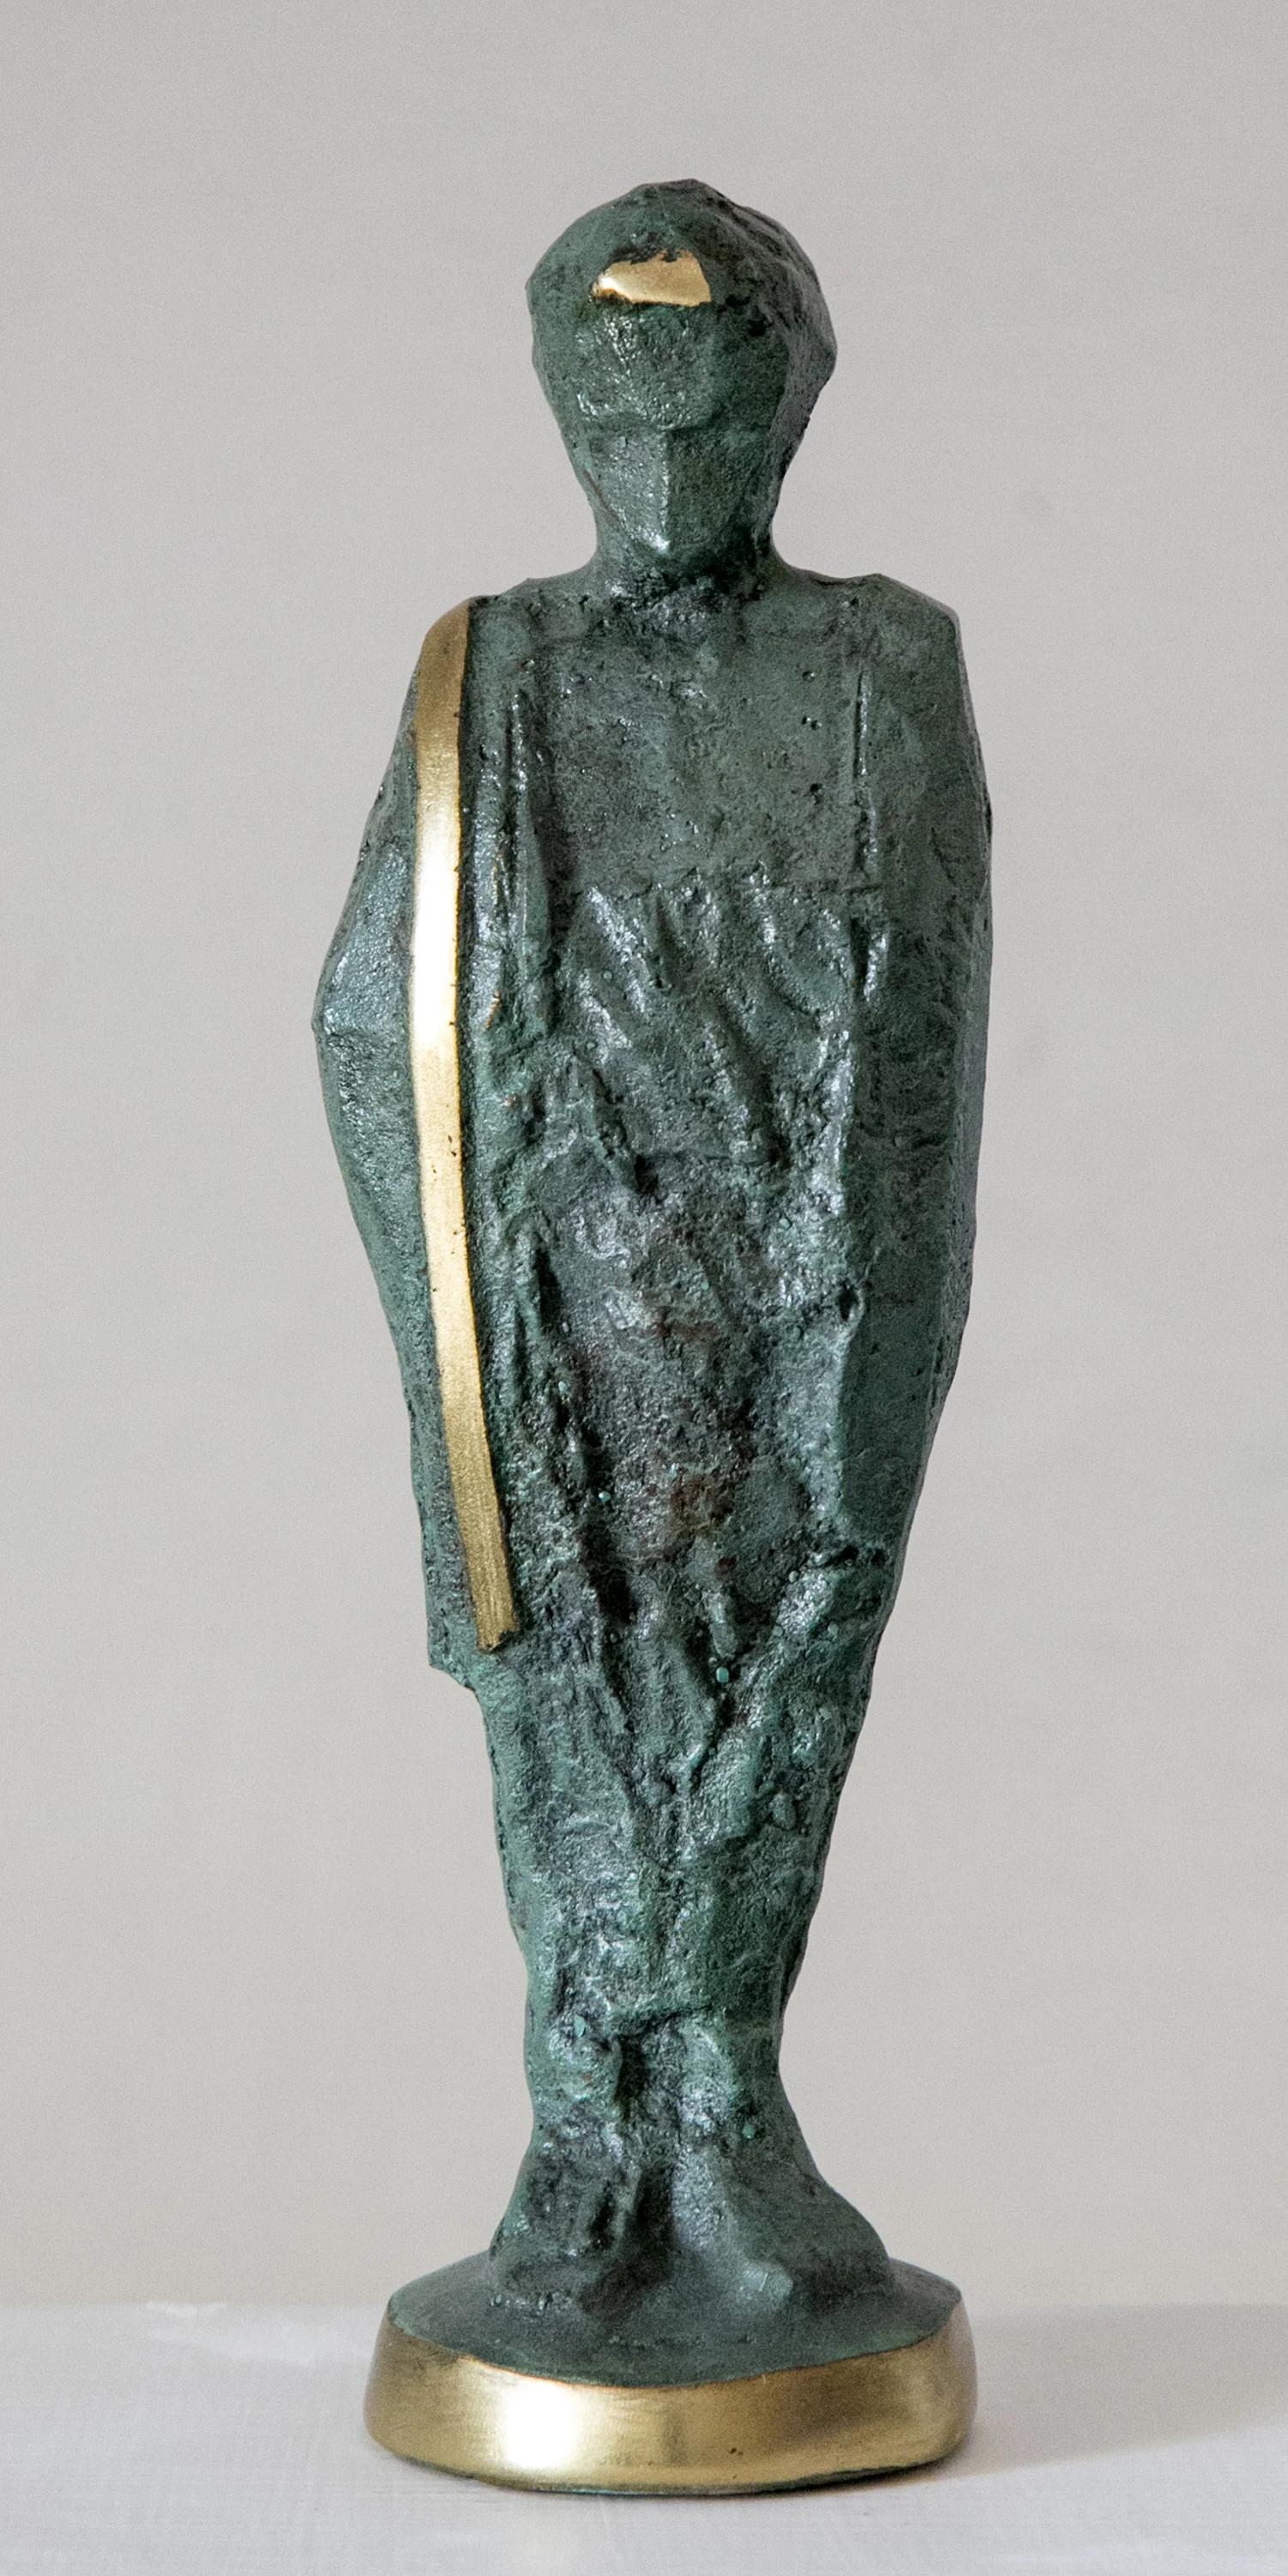 "Minister" Bronze Sculpture 12" x 3" x 2" inch by Sarkis Tossonian		